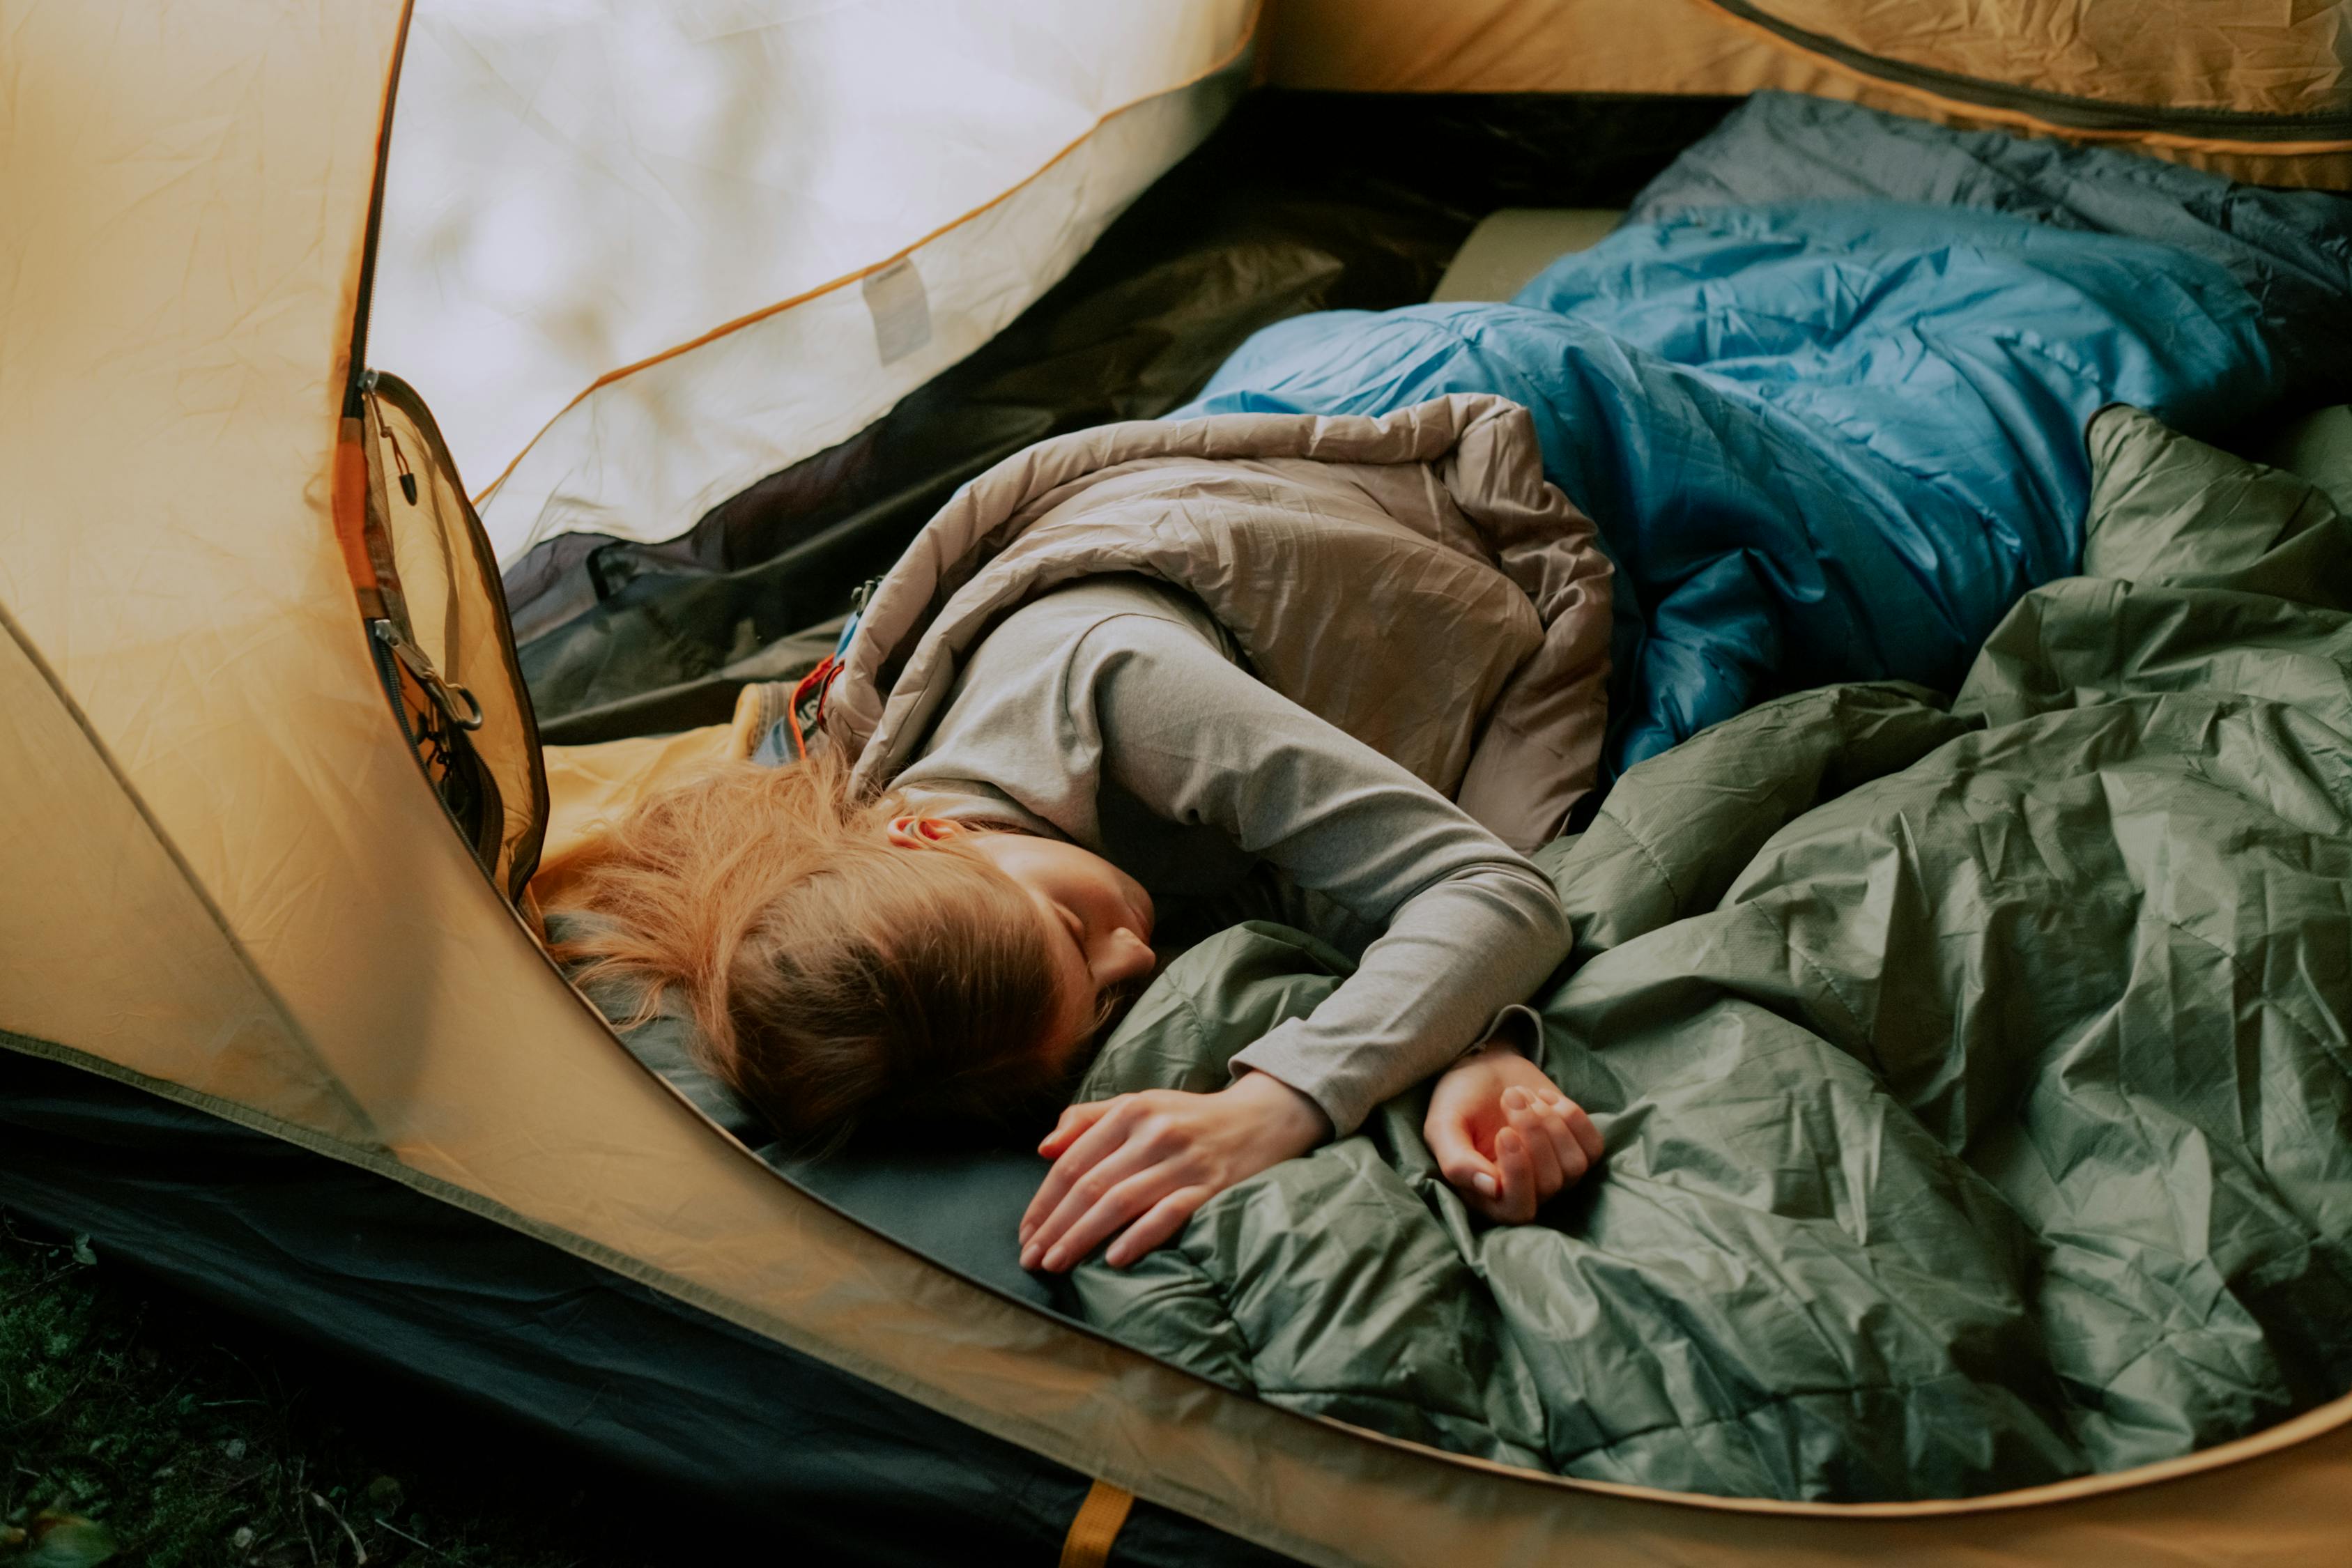 How To Enjoy Tent Camping In 30-Degree Weather - Our Guide To Sleeping Well 1